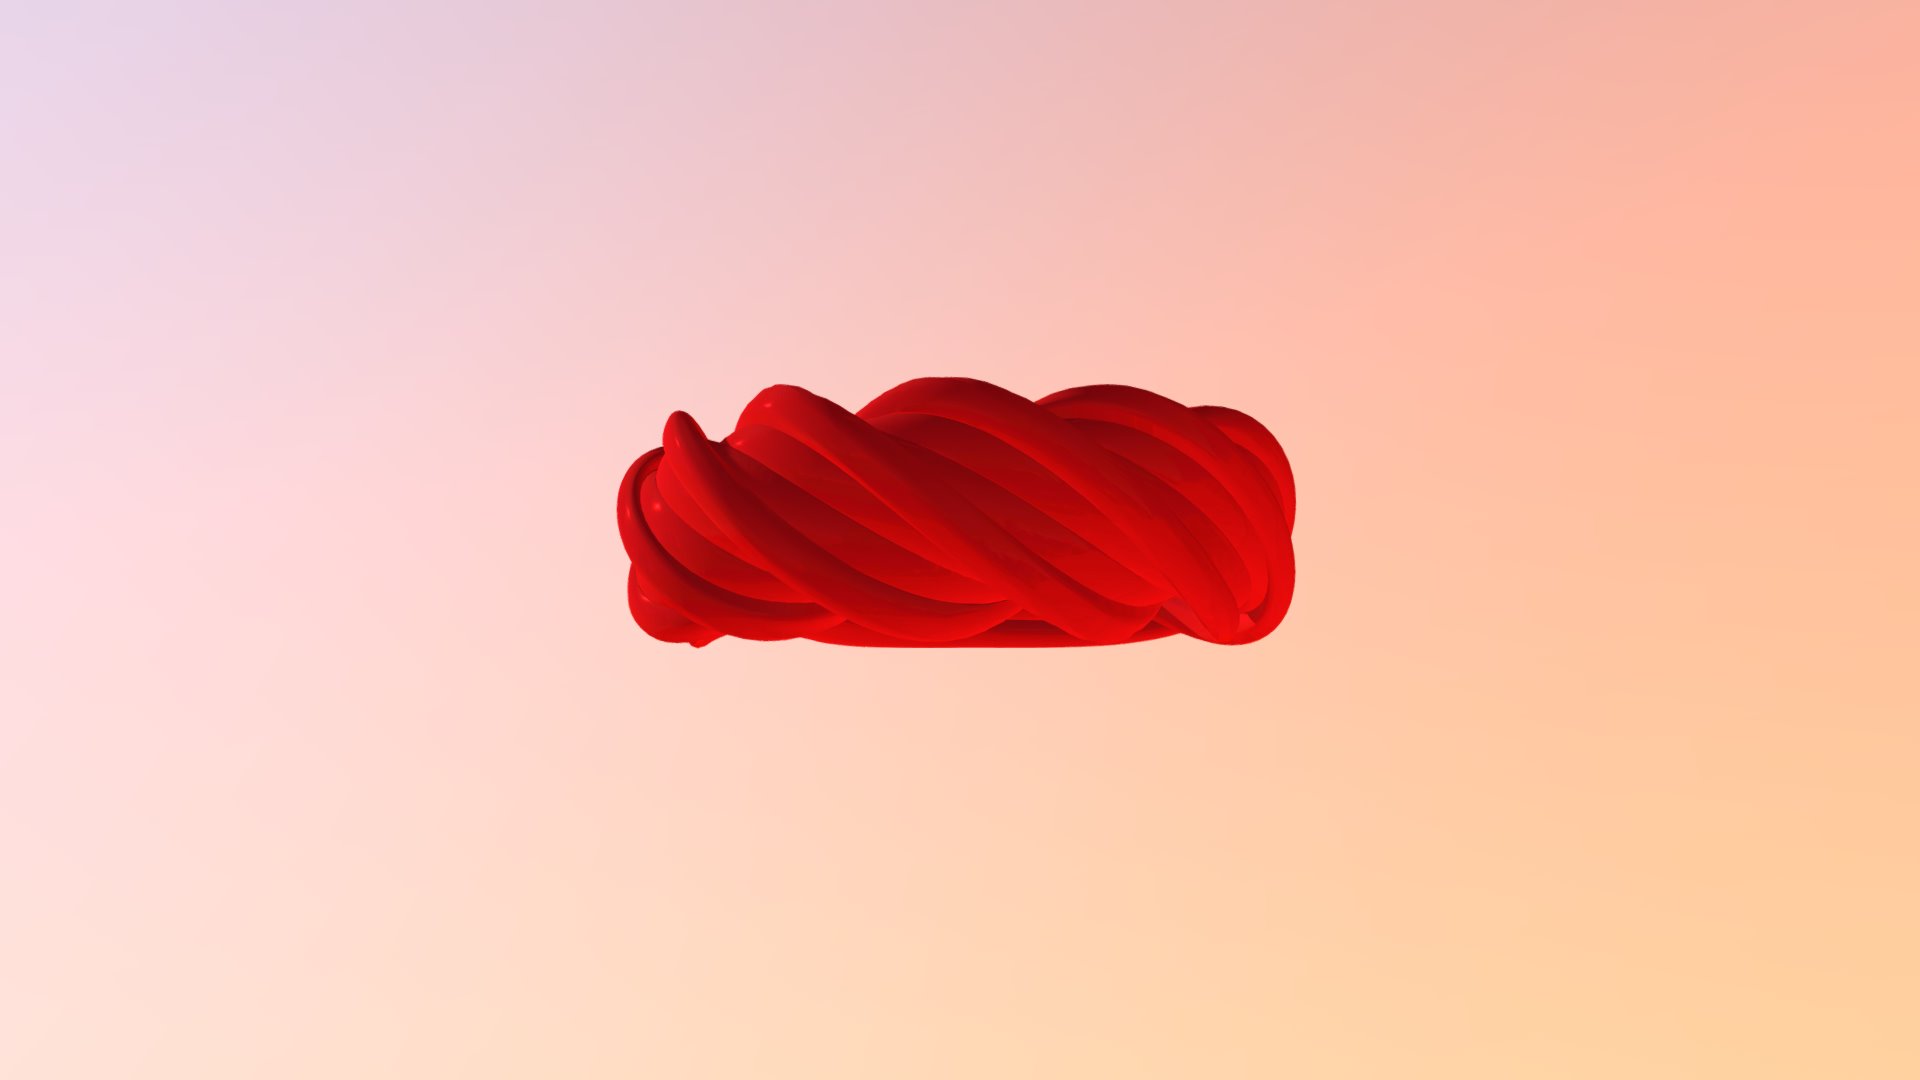 3D model pretzel twist chain hanger - This is a 3D model of the pretzel twist chain hanger. The 3D model is about a red flower on a white background.